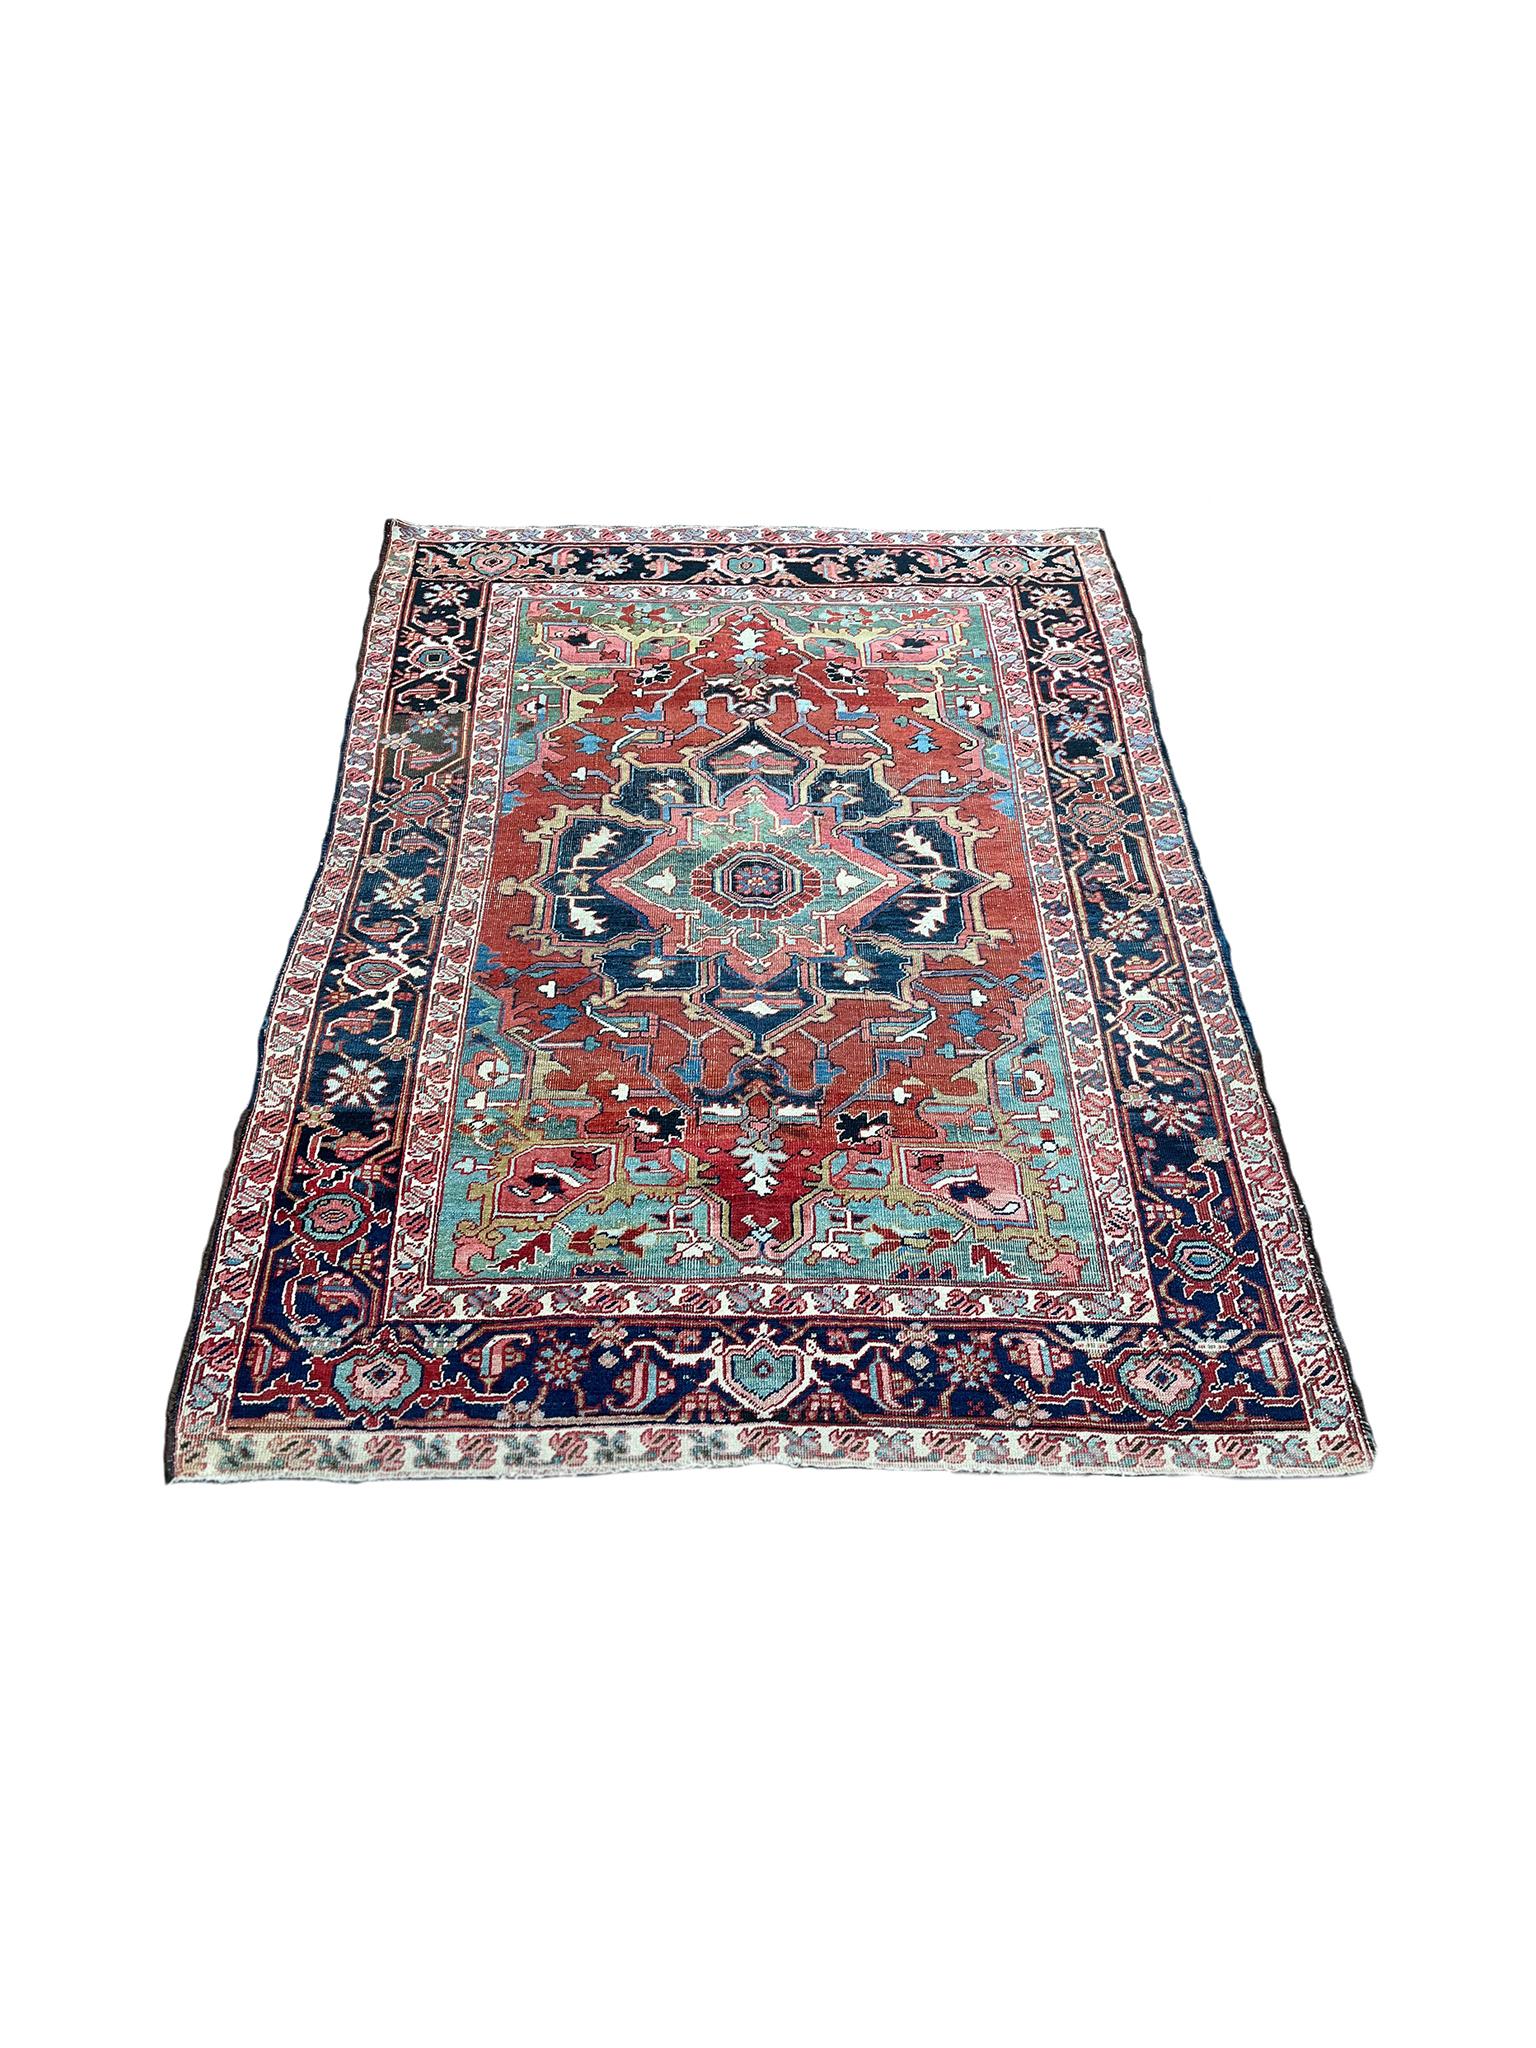 Woven in the Early 20th Century, this Persian Heriz rug is designed with a classic central medallion framed by a series of densely patterned borders. Floral and vine motifs compose the patterns in a brilliant palette of blues, reds, greens, and